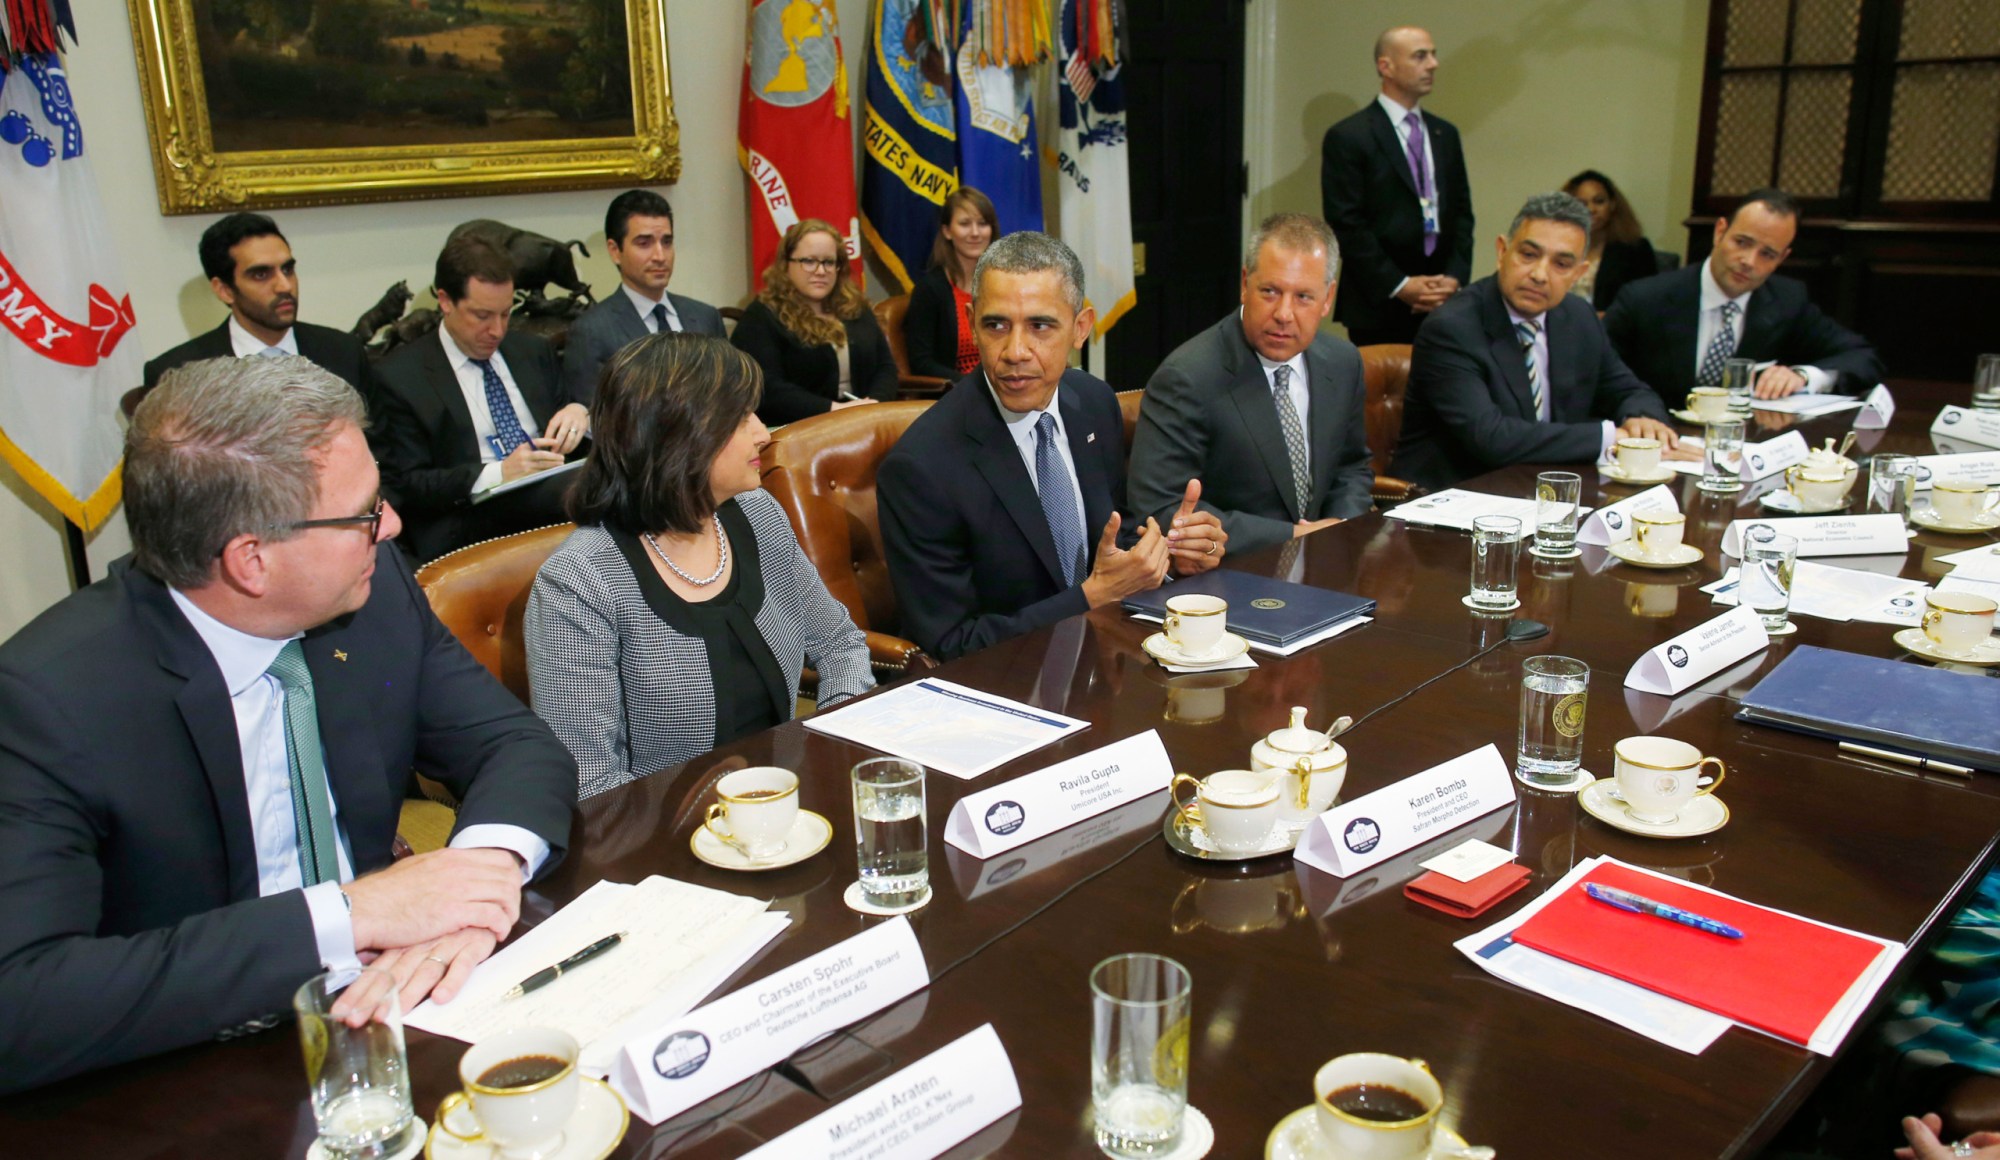 President Barack Obama meets with business leaders about creating and investing in jobs in the United States, Tuesday, May 20, 2014, in the Roosevelt Room of the White House in Washington. (AP/Charles Dharapak)